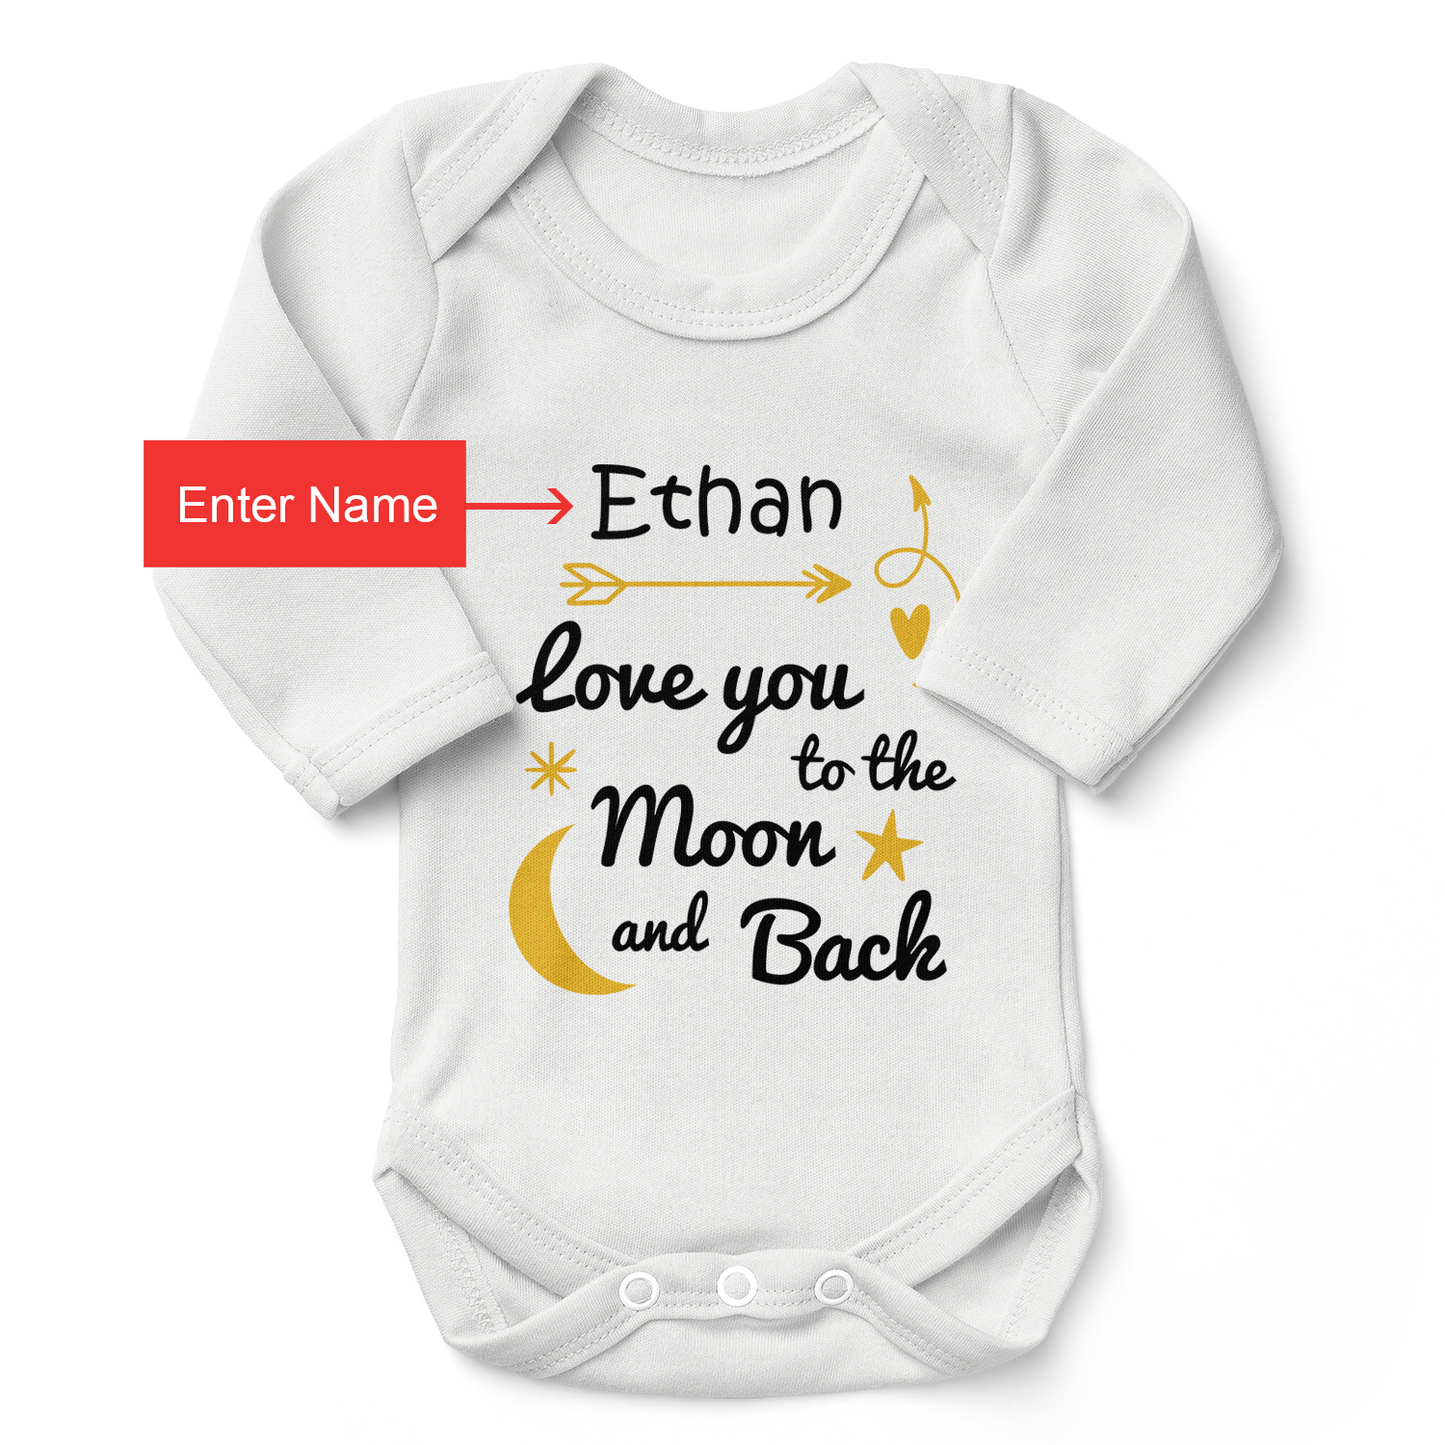 Personalized Organic Baby Bodysuit - Love You To The Moon & Back (White)